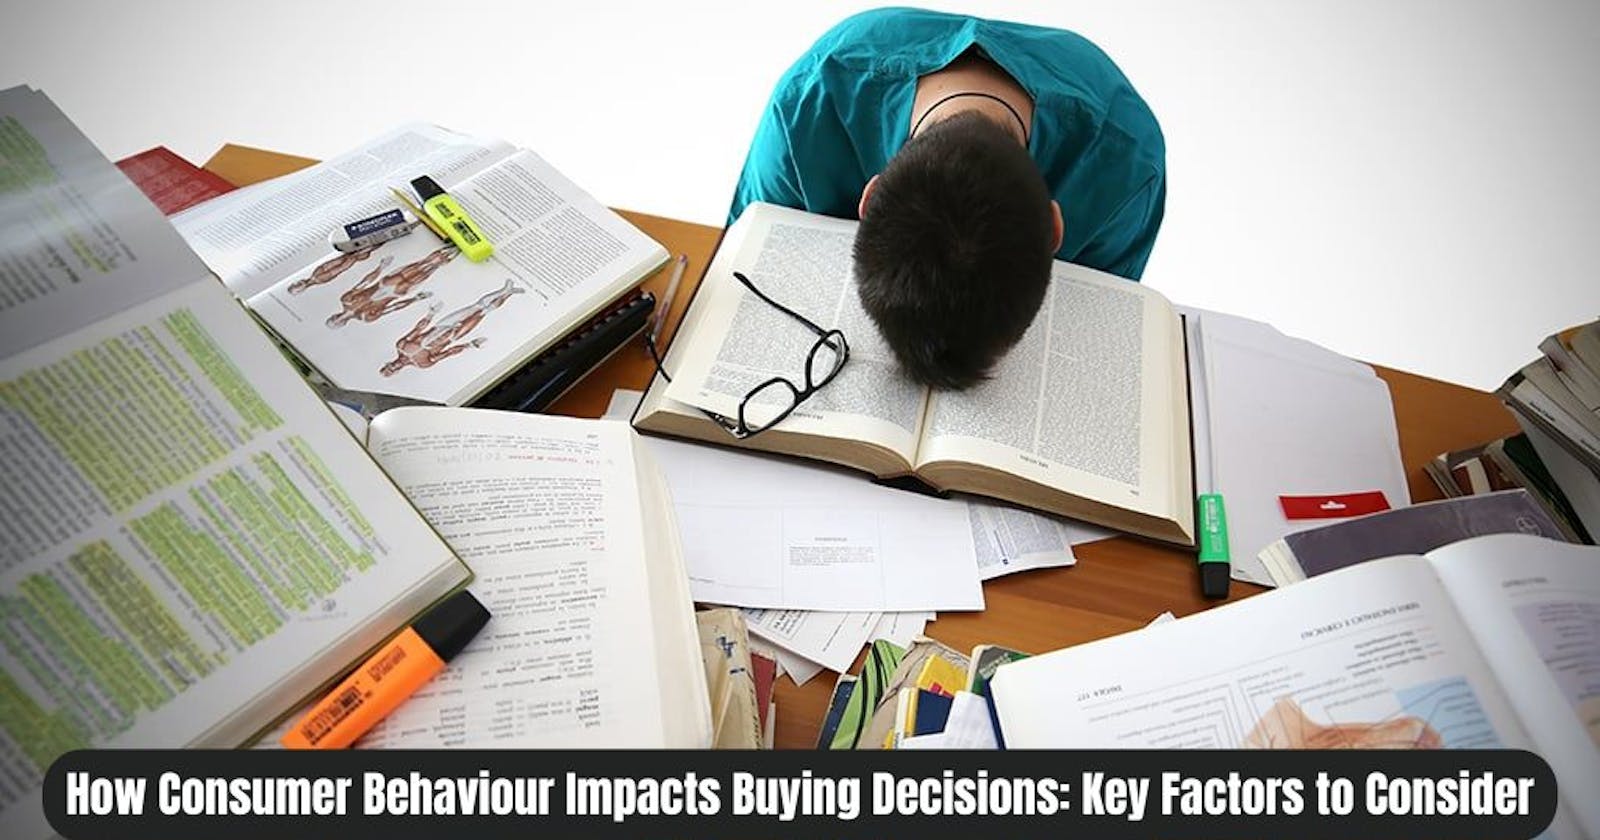 How Consumer Behaviour Impacts Buying Decisions: Key Factors to Consider